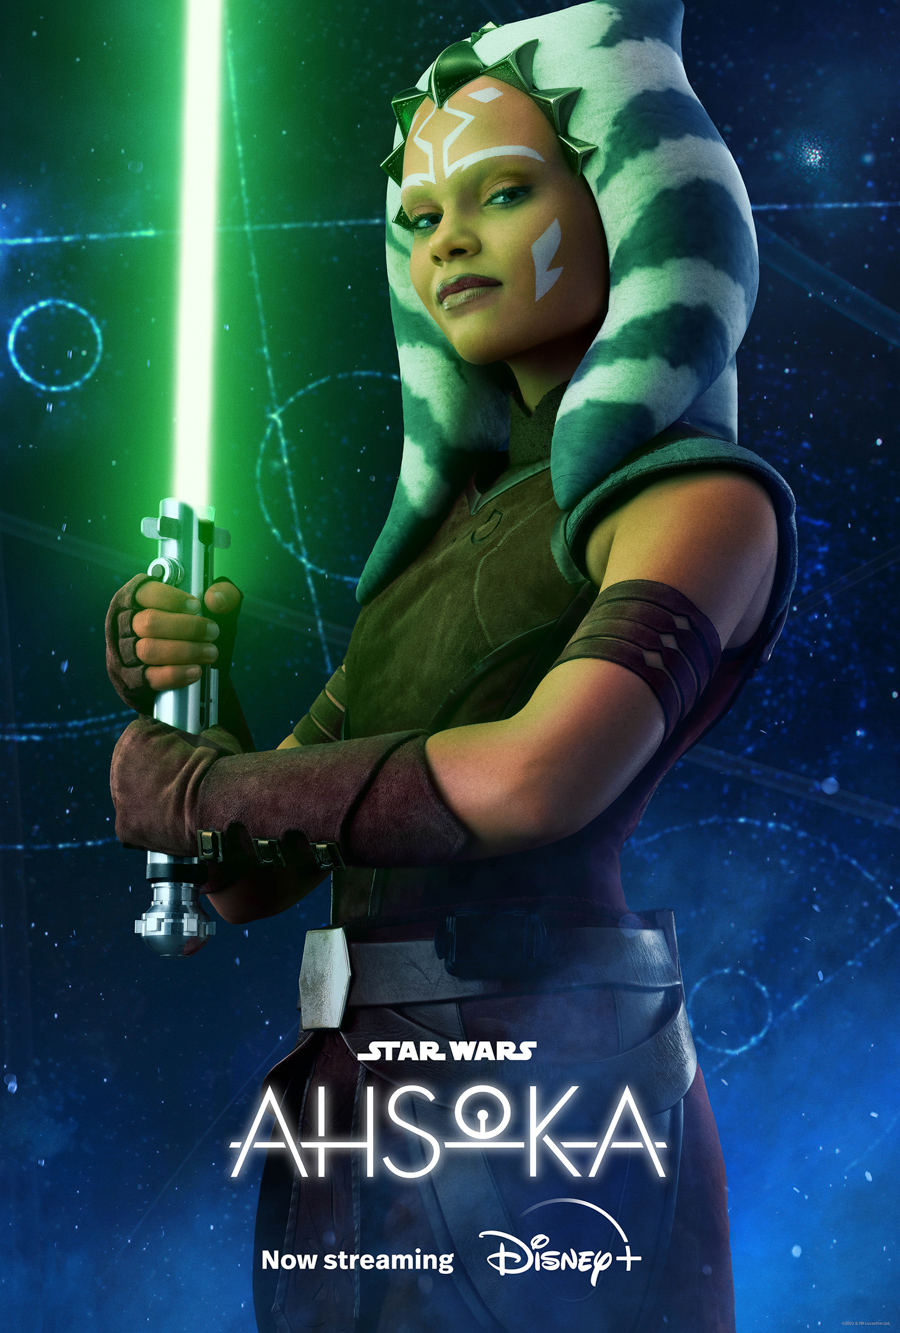 Young Ahsoka Tano from Ahsoka played by Ariana Greenblat is holding a green lightsaber while standing in front of a blue galaxy background. Star Wars Ahsoka is written in white on the bottom with now streaming written beneath that with the Disney plus logo written beside now streaming.